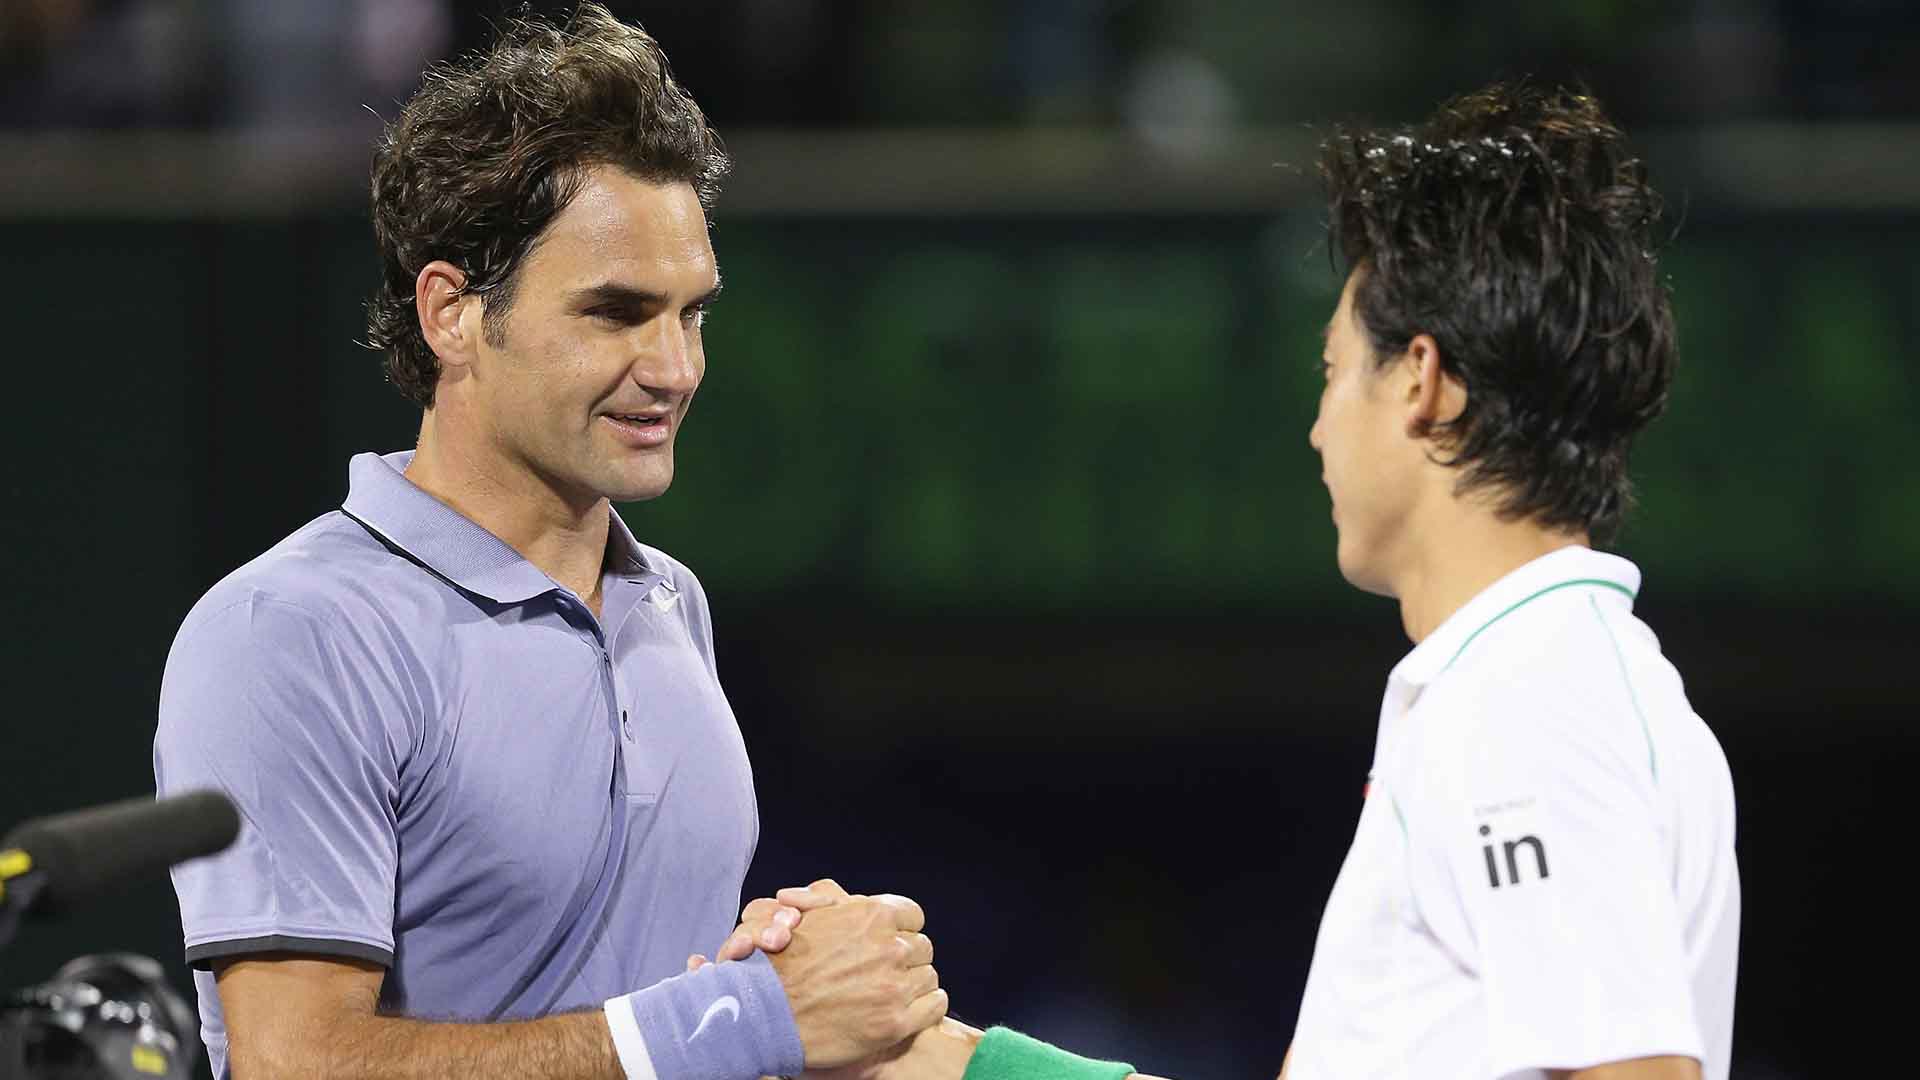 Roger Federer and Kei Nishikori are tied at 2-2 in their ATP Head2Head series at ATP Masters 1000 events.